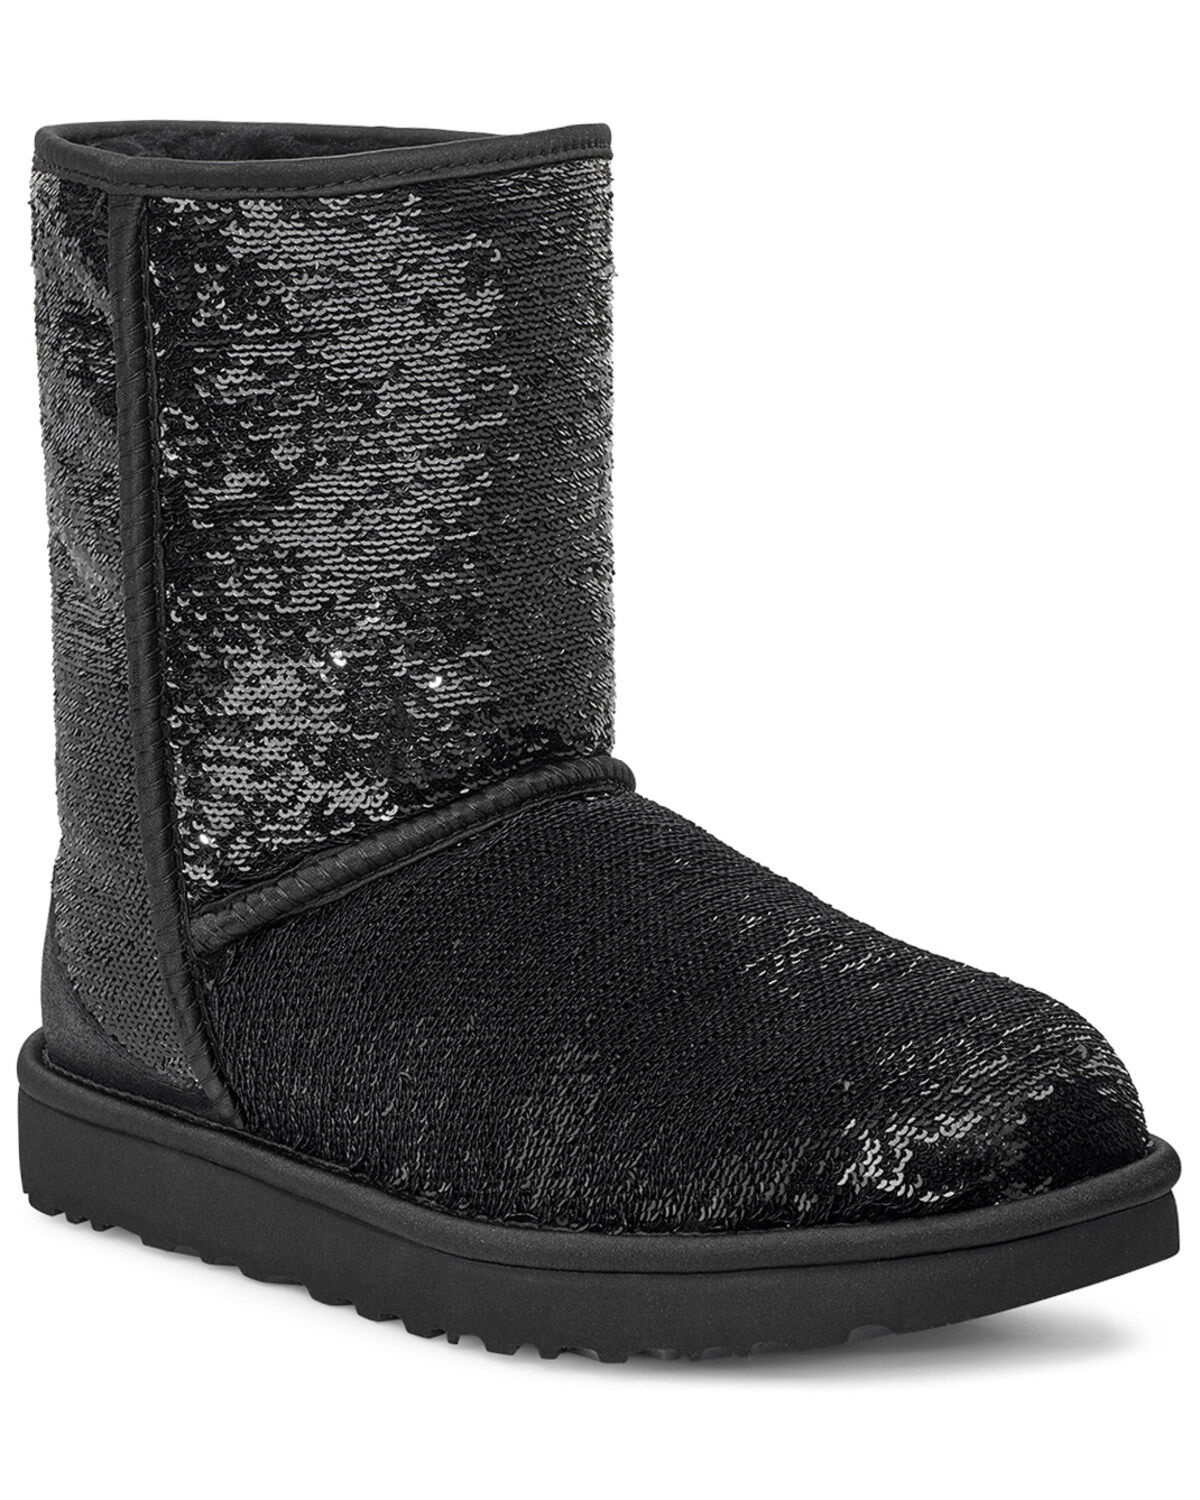 classic ugg sparkle boot